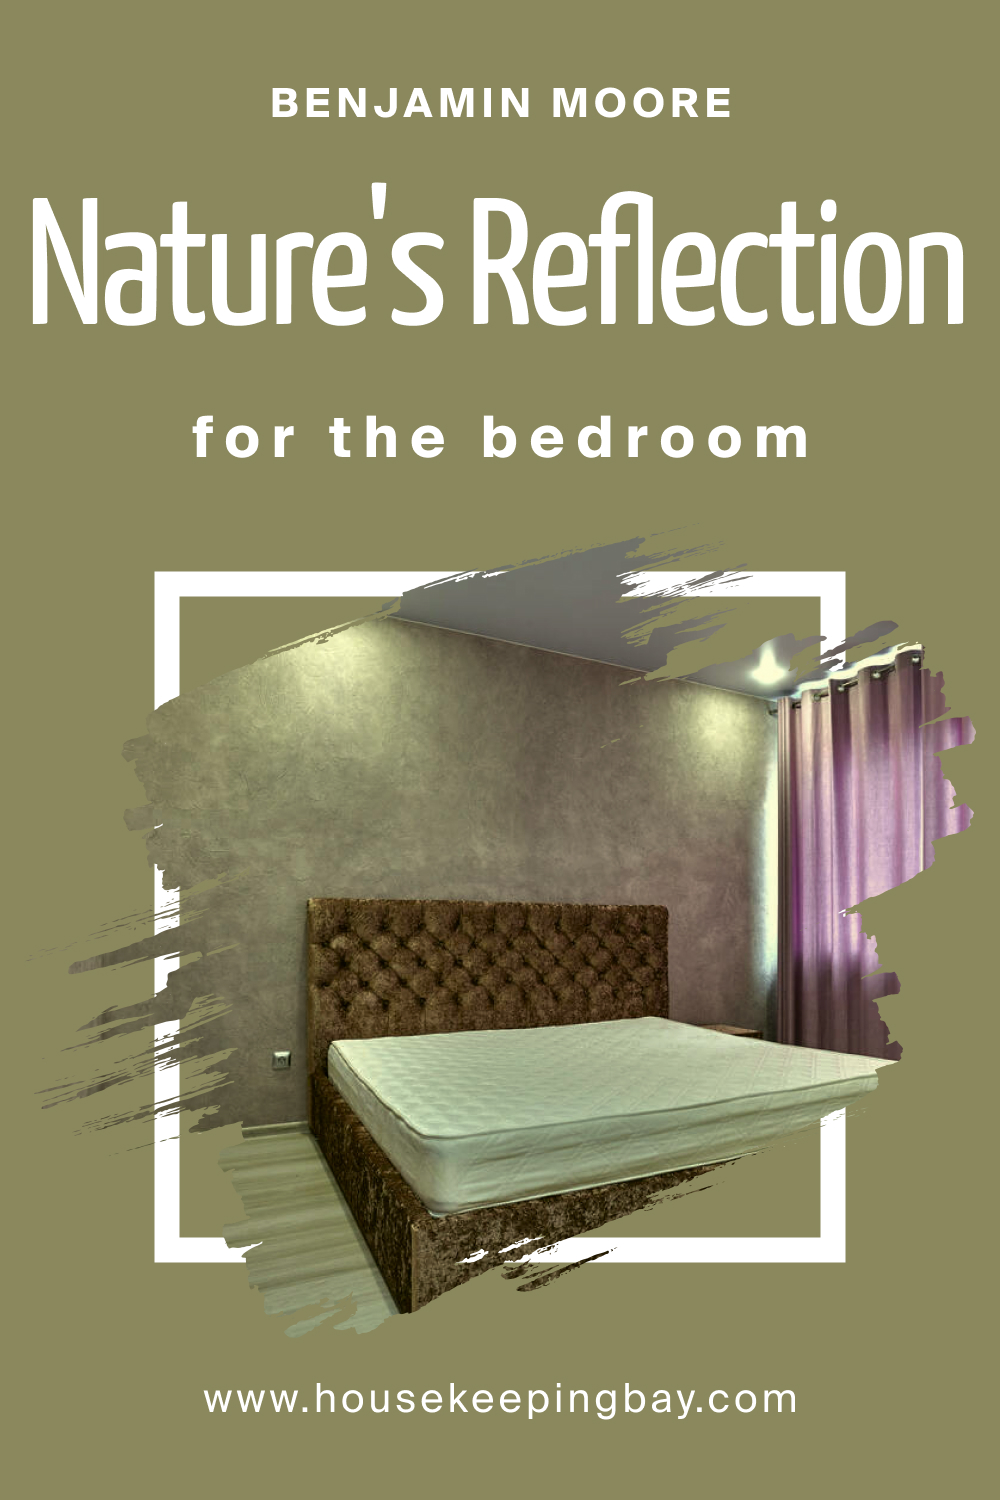 How to Use BM Nature's Reflection 504 in the Bedroom?